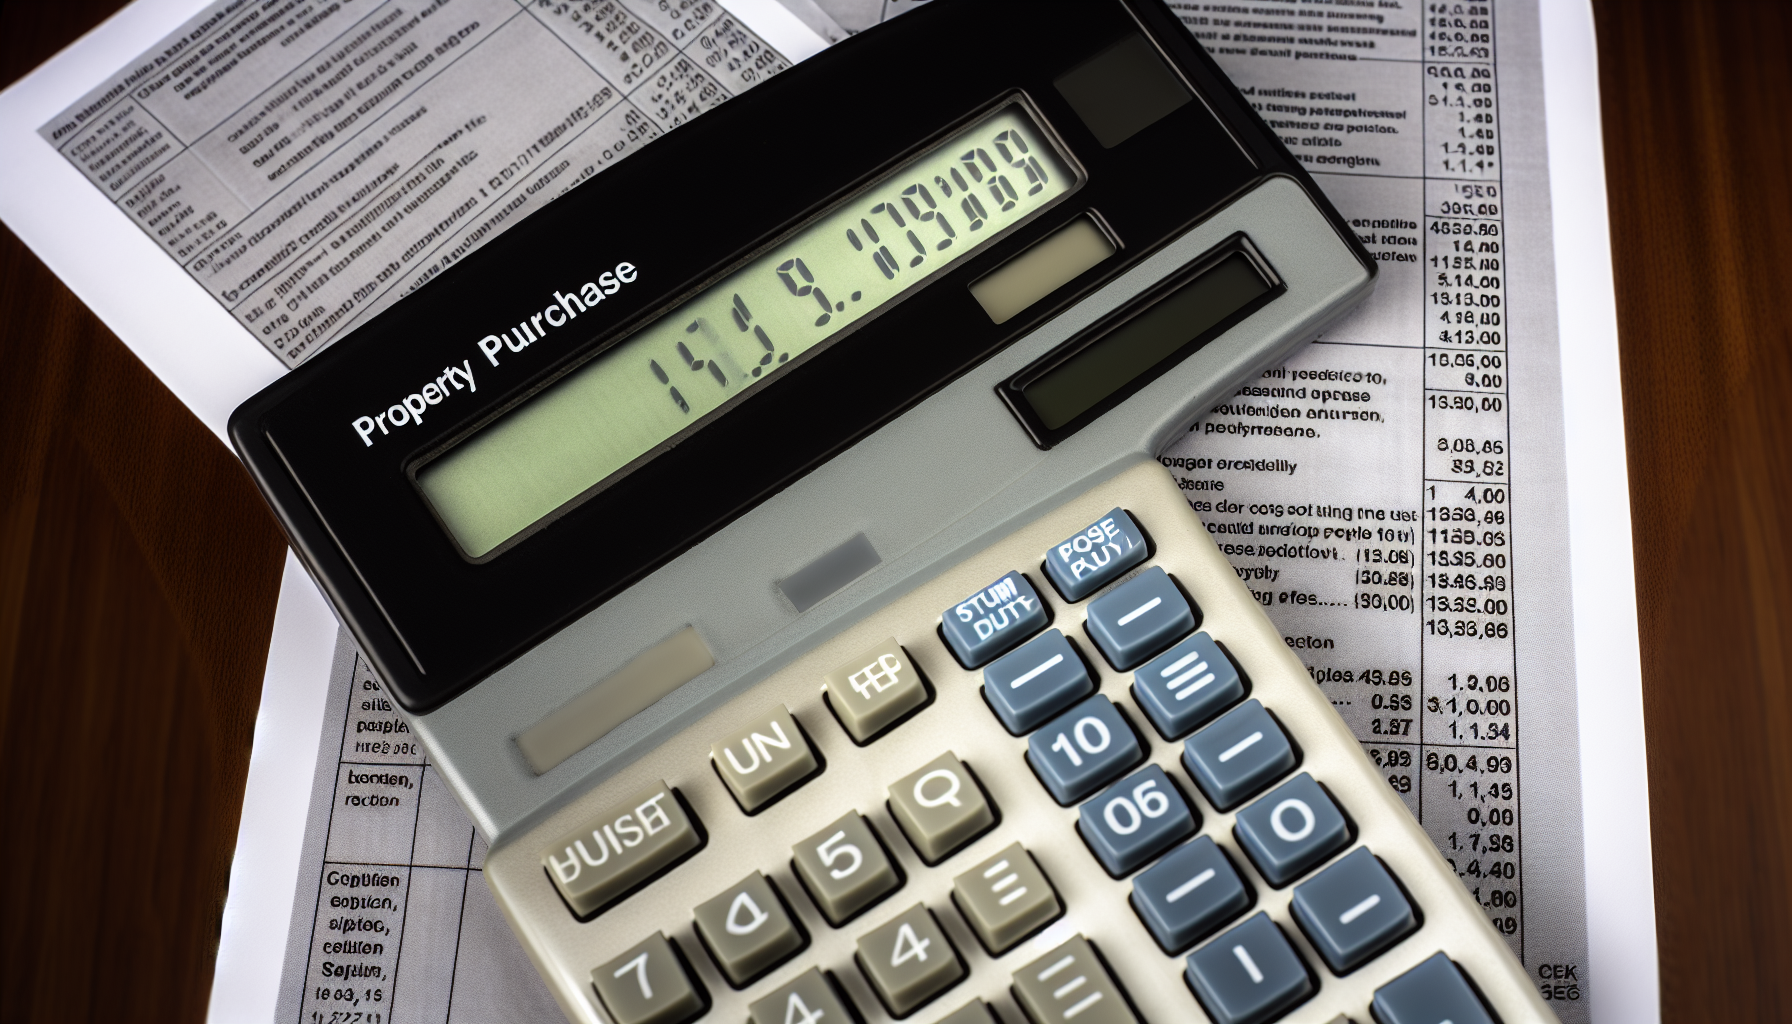 Photo of a calculator with property purchase cost calculations